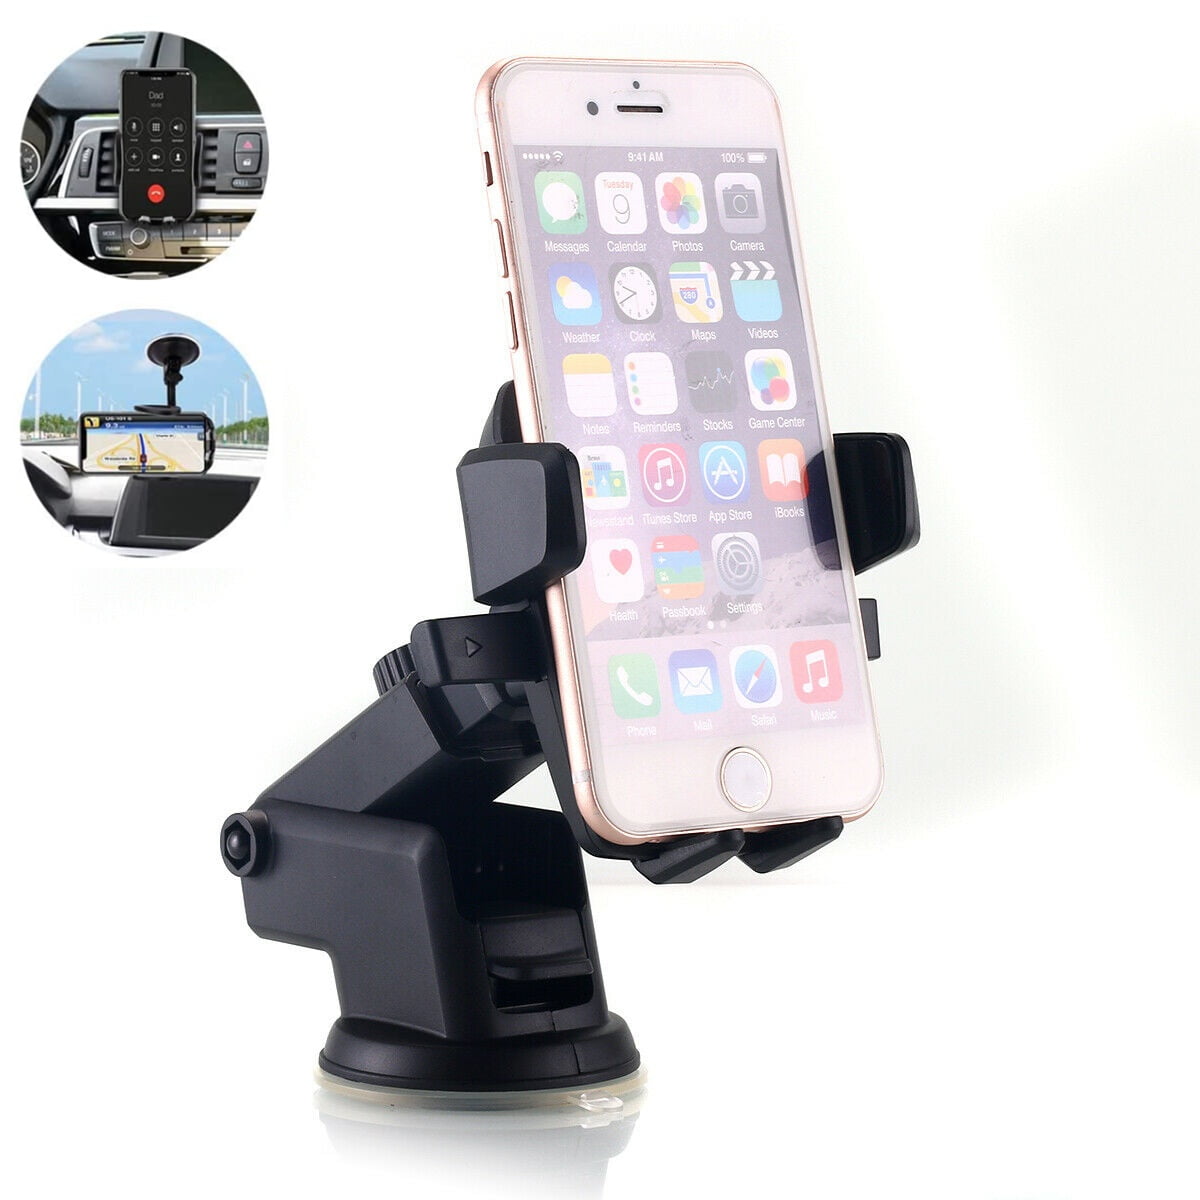 7 7 GZJ Car Phone Holder,Automatic Induction Car Phone Mount Compatible with iPhone Xs XS Max XR X 8 8 6 5S 4 Samsung S10 9 8 7 6 5 4 LG Huawei SE 6S 6